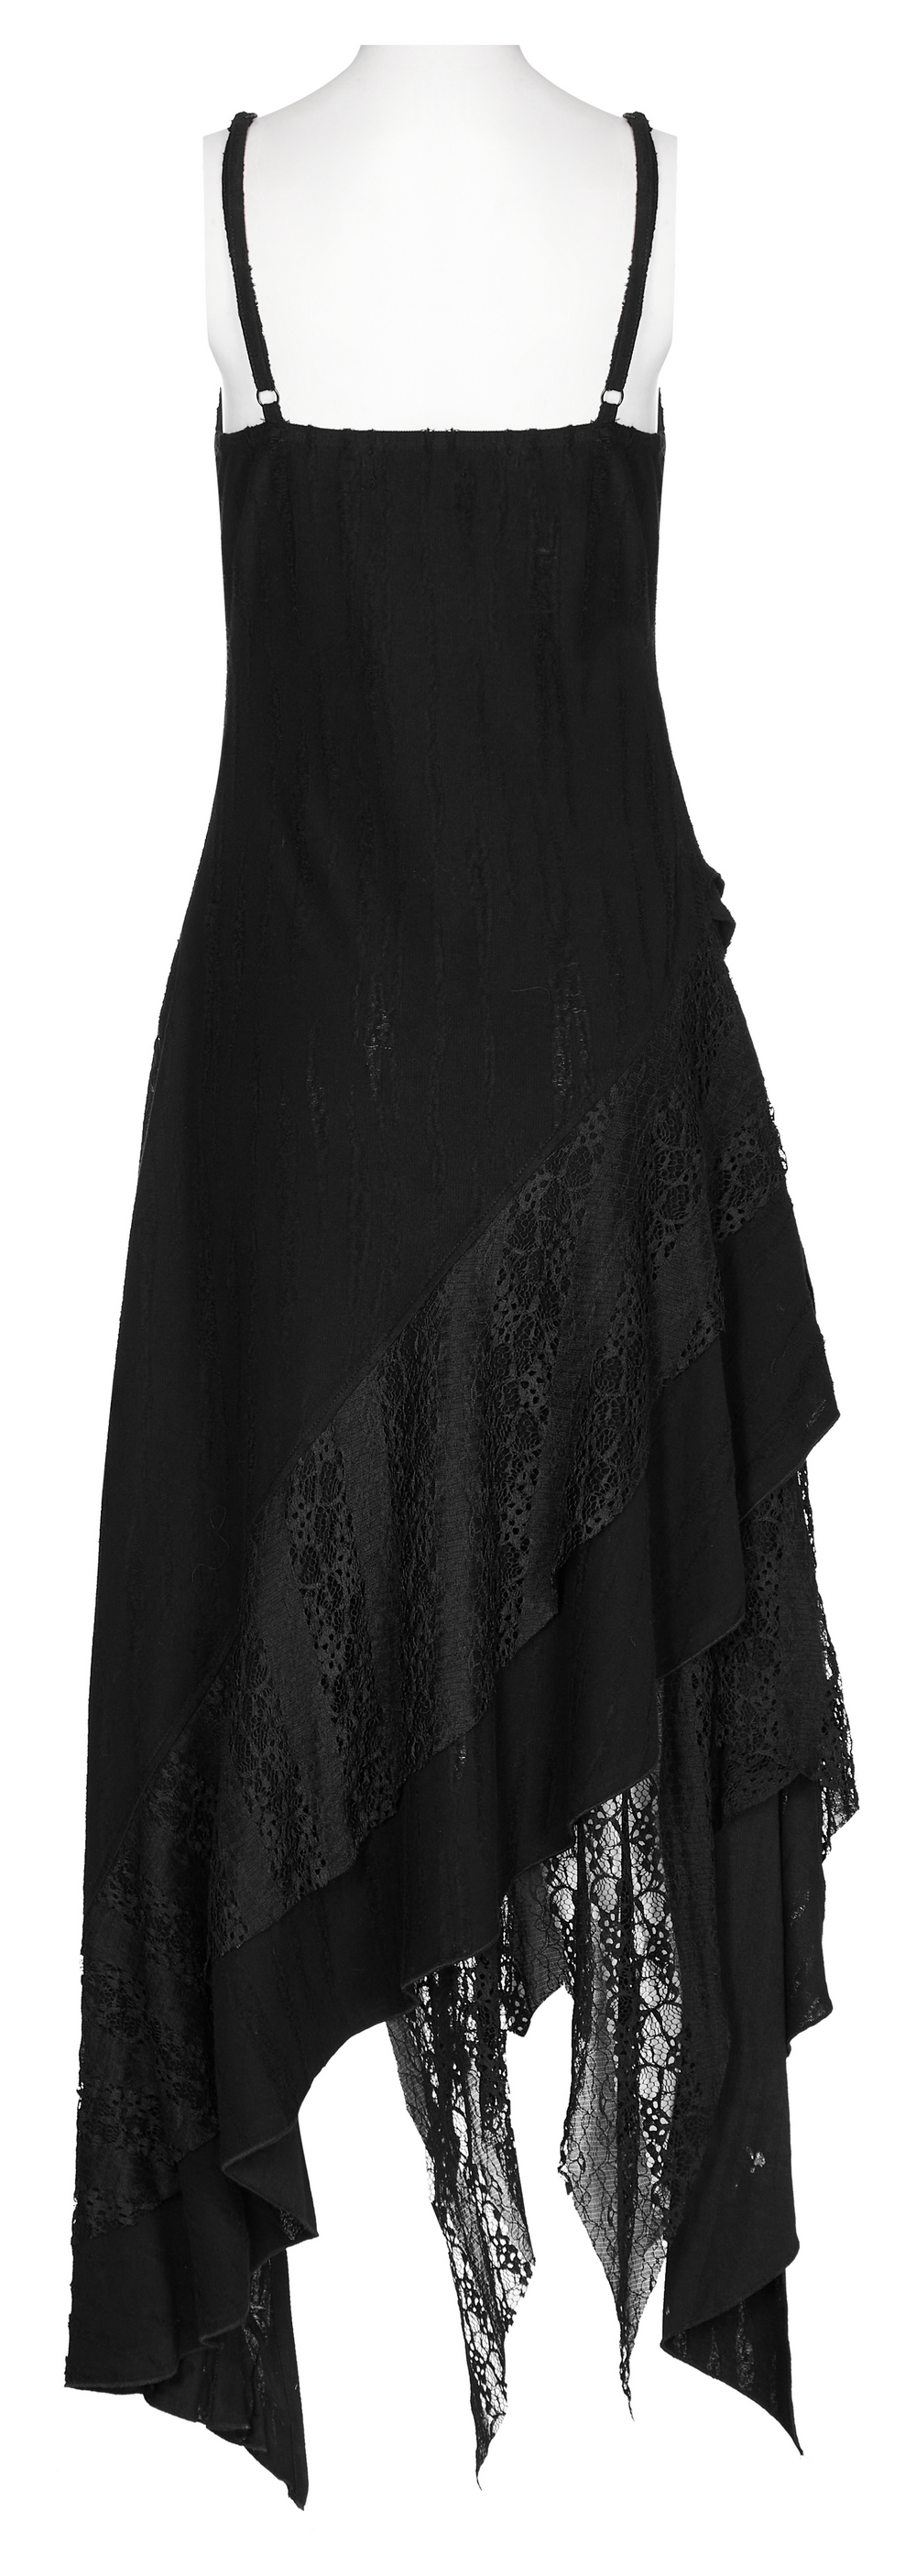 Black Mesh Lace Asymmetrical Pointed Gothic Dress